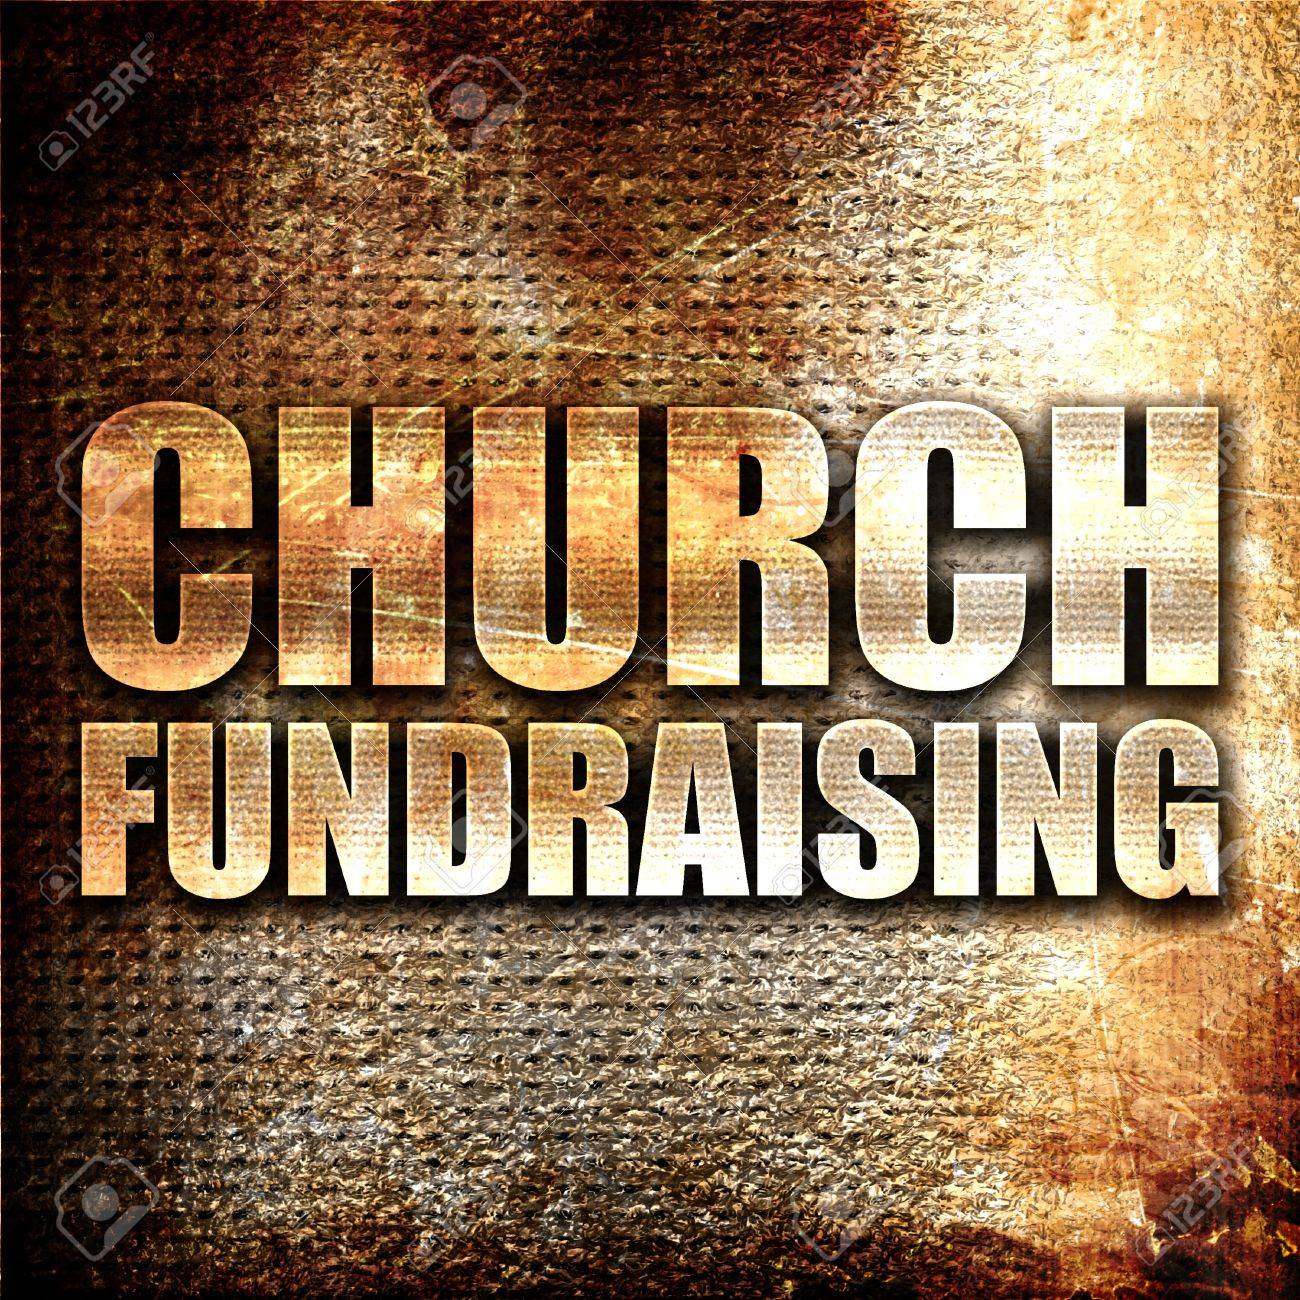 Church Fundraising 3d Rendering Metal Text On Rust Background